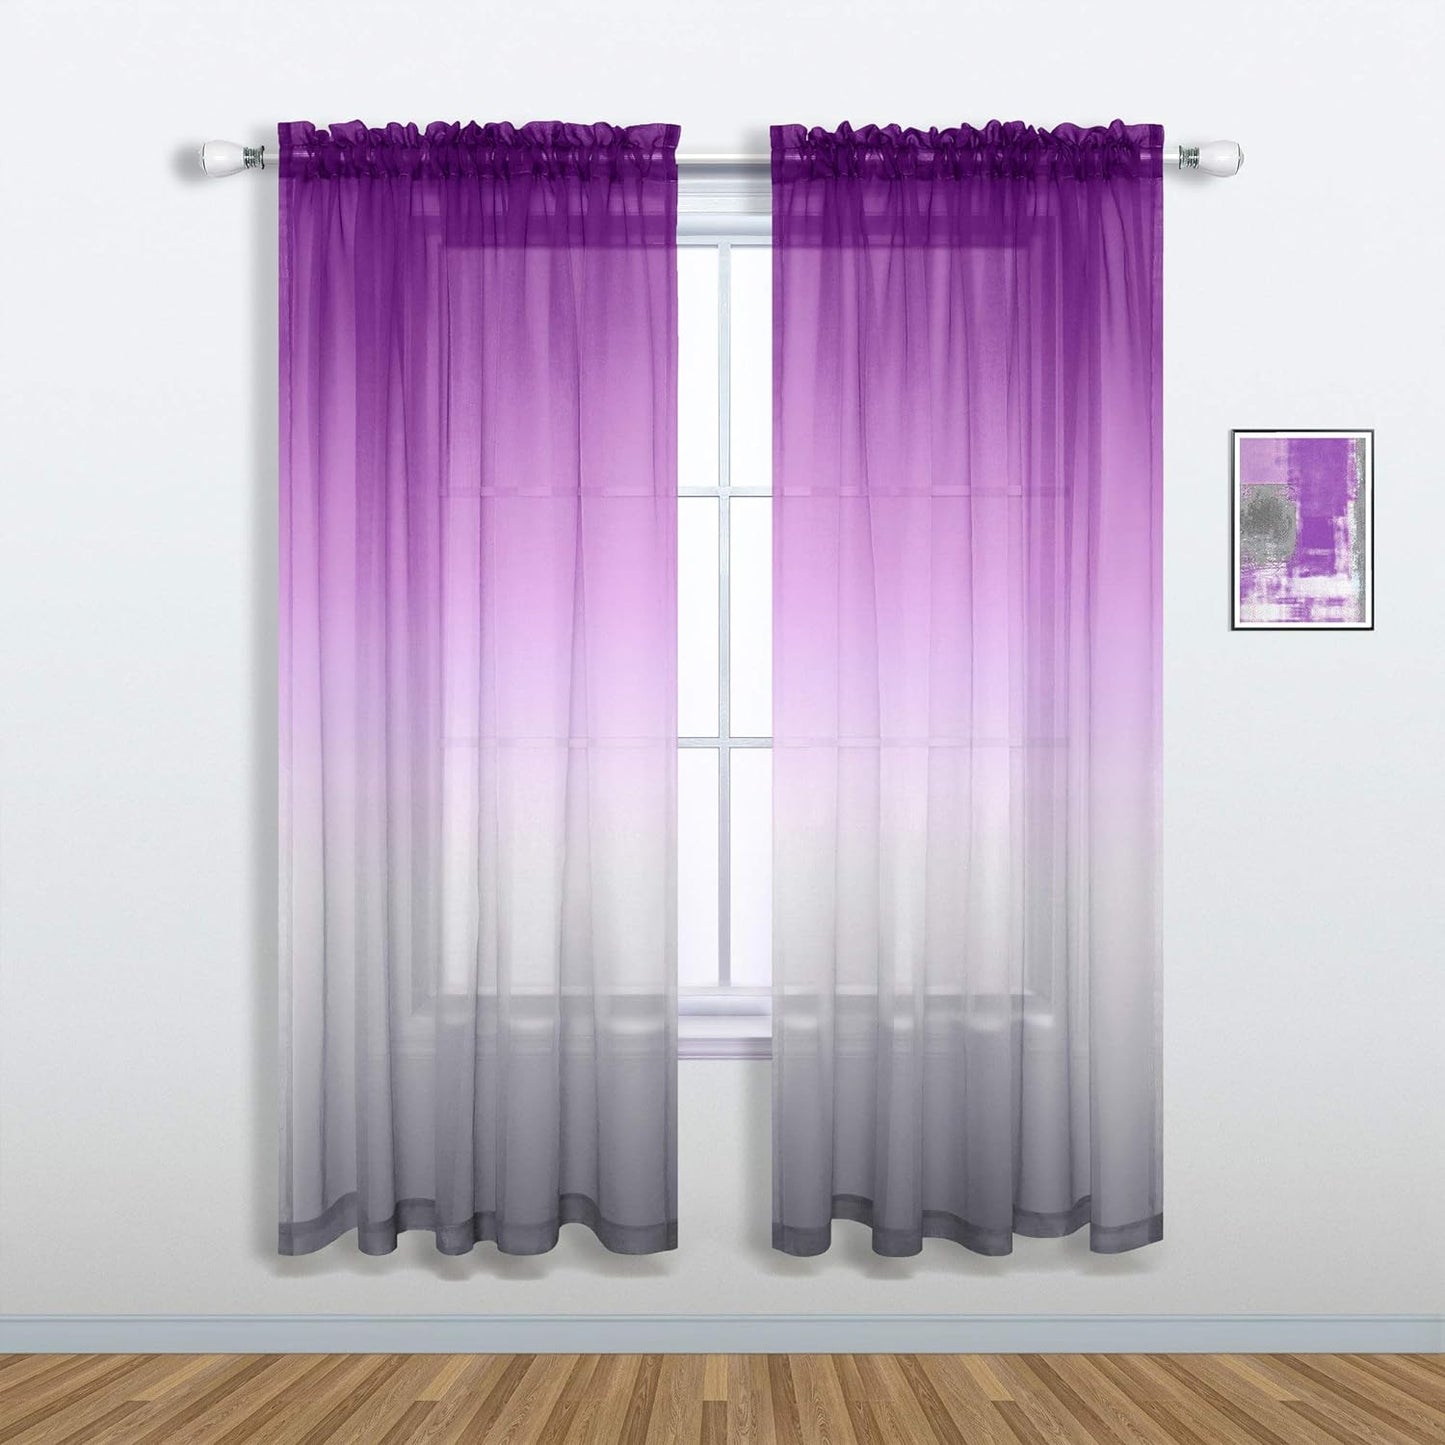 Pink and Purple Curtains for Girls Bedroom Decor Set 1 Single Panel Pocket Window Voile Pastel Sheer Ombre Rainbow Curtain for Kid Room Decoration Teen Princess 63 Inch Length Gradient Lilac Lavender  MRS.NATURALL TEXTILE Purple And Gray 52X63 